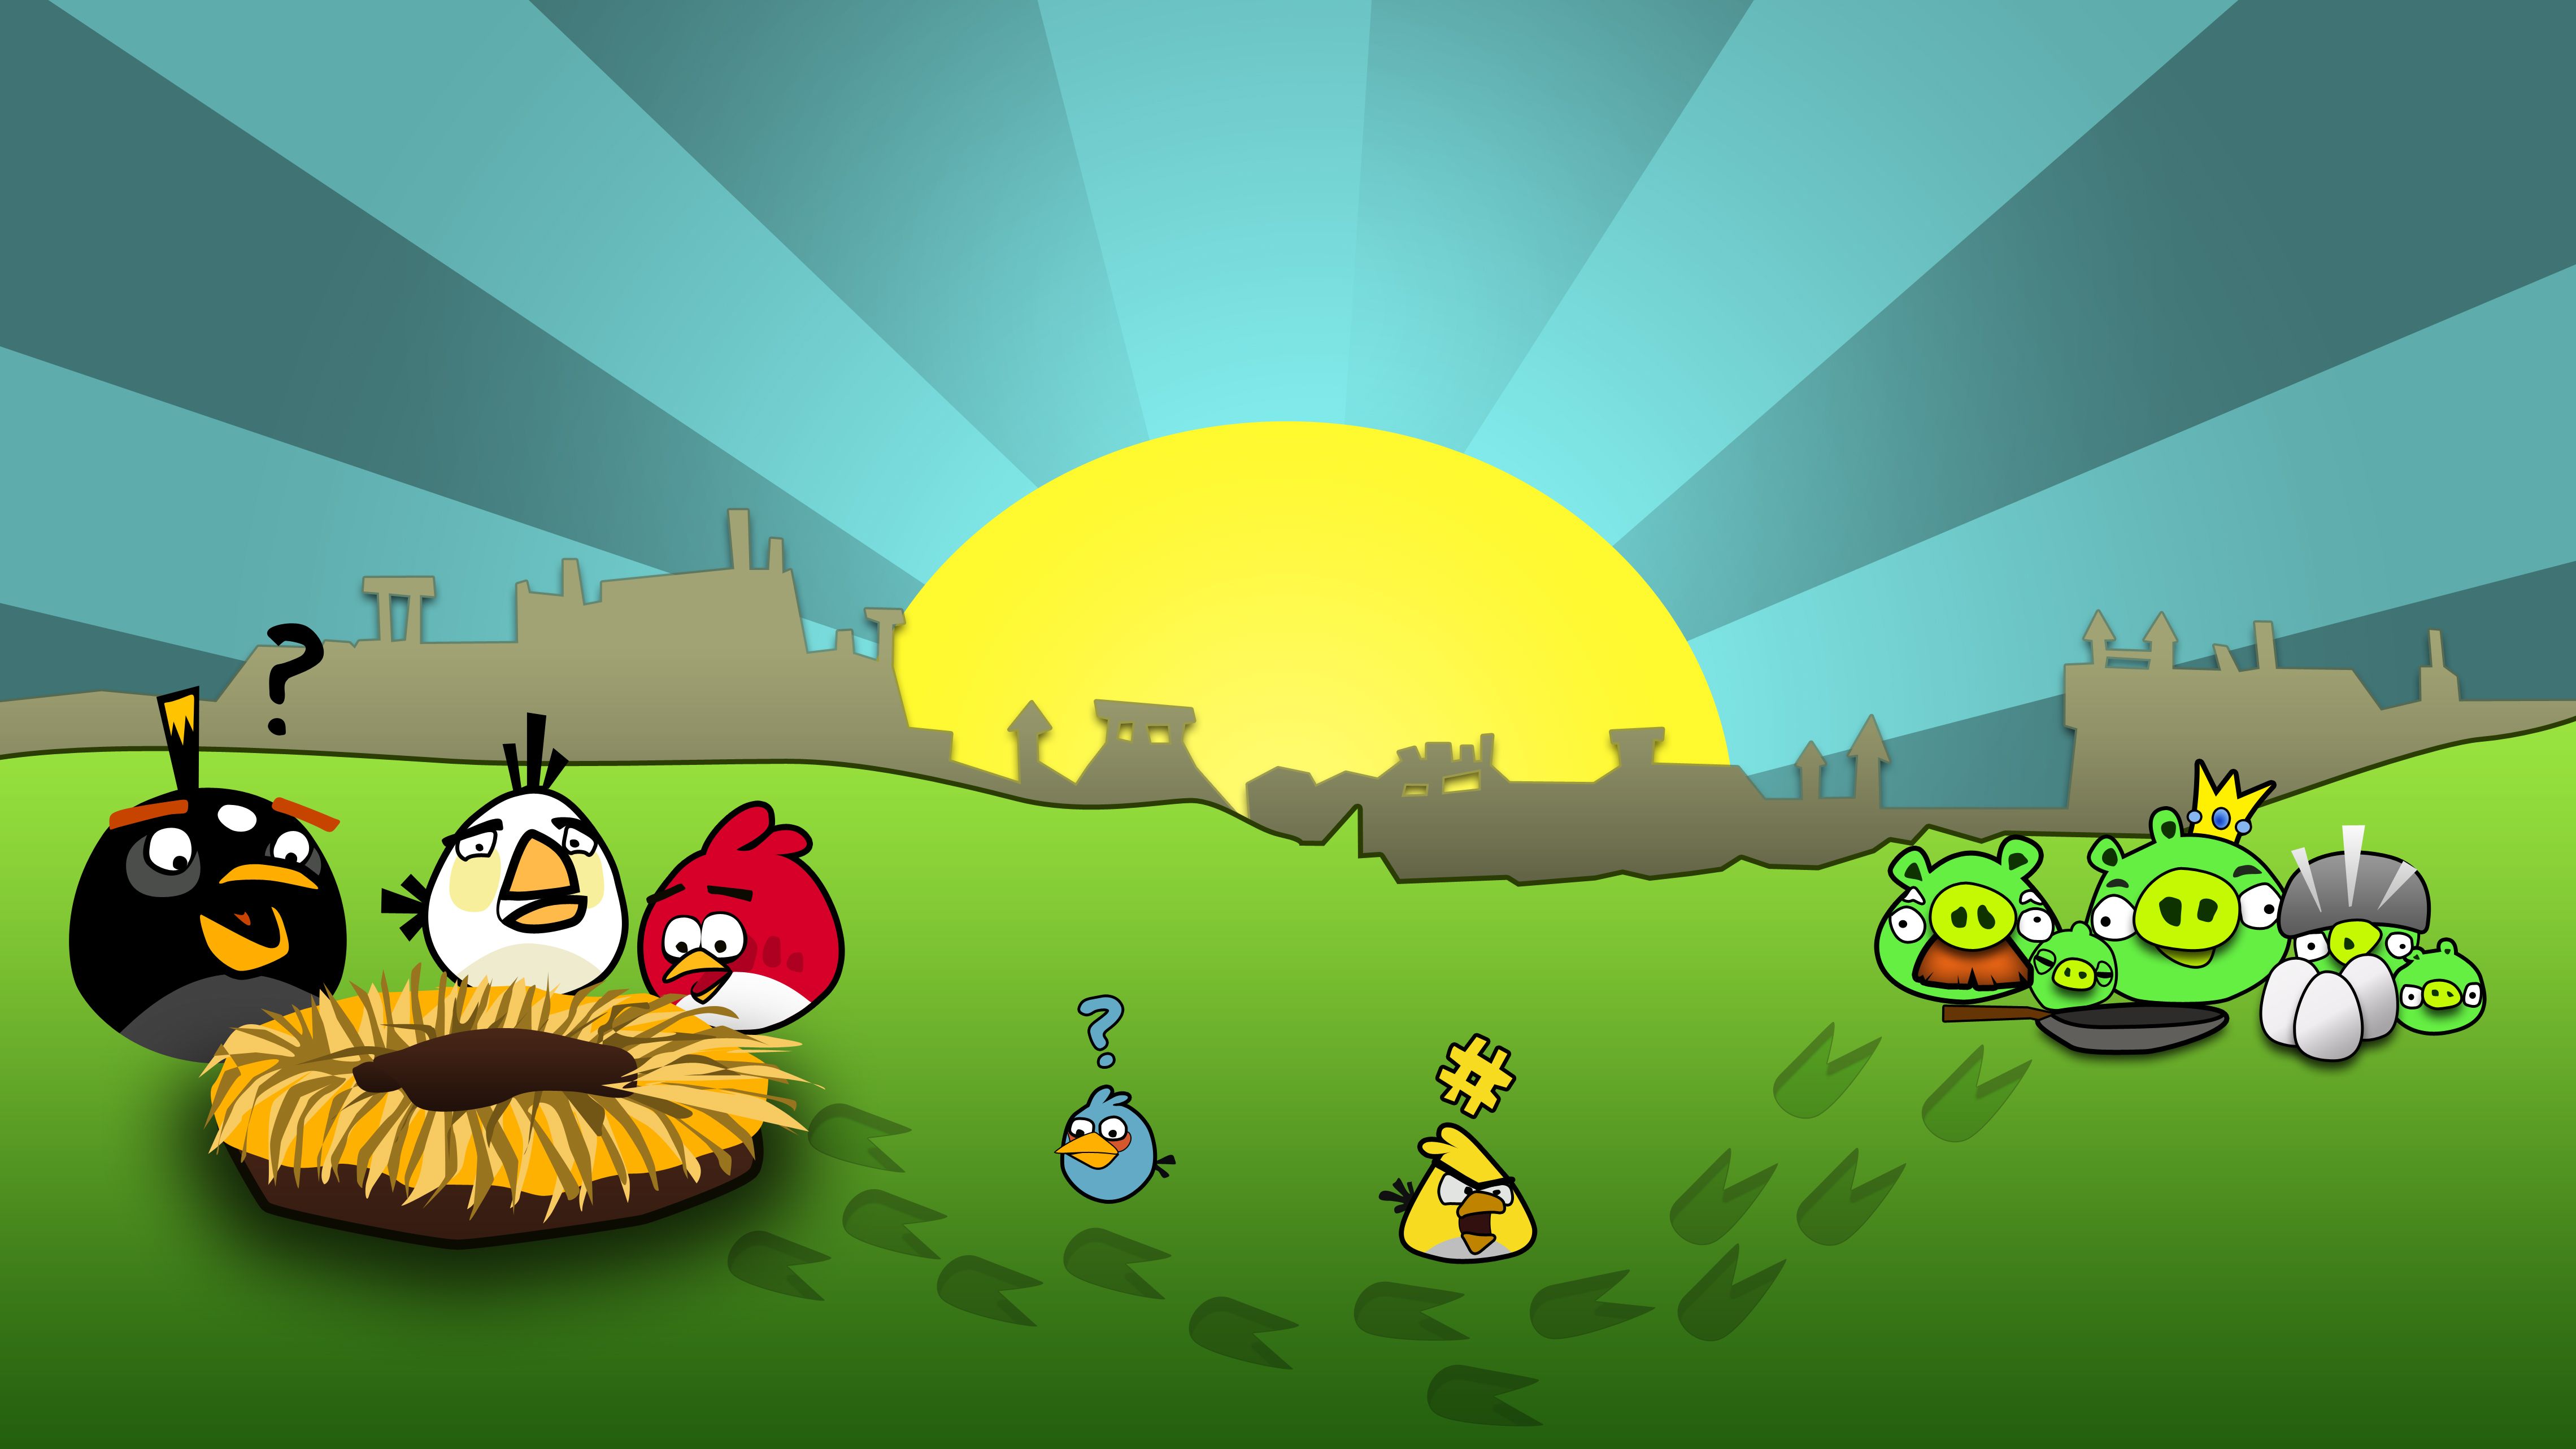 Angry Birds HD Wallpapers - Page 2 of 2 - Cool Wallpapers